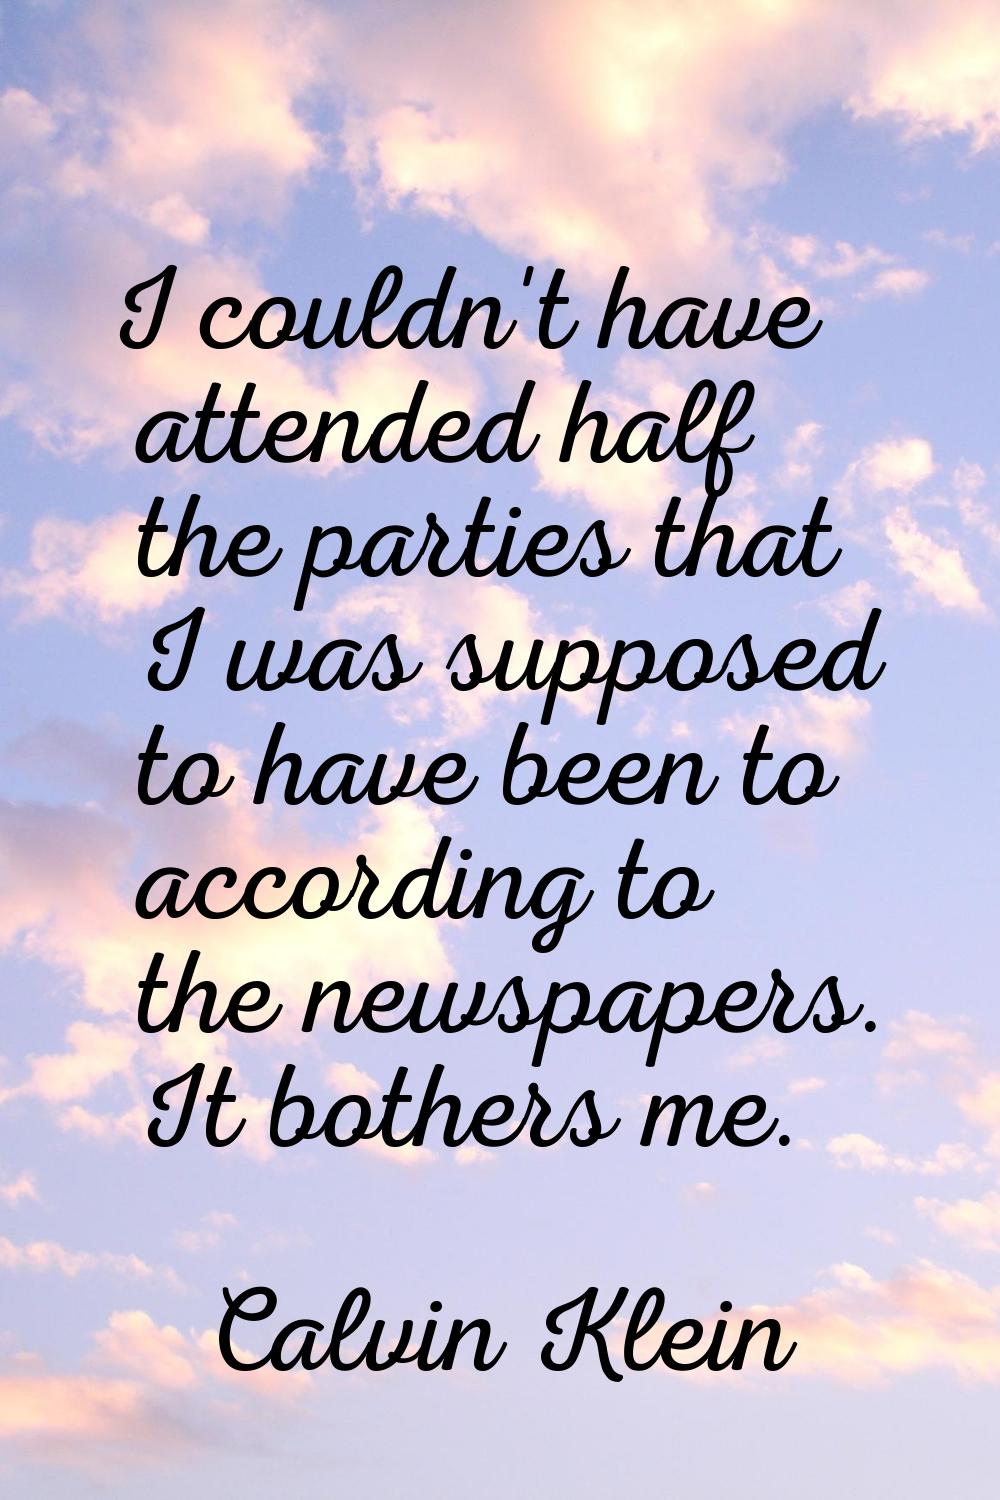 I couldn't have attended half the parties that I was supposed to have been to according to the news